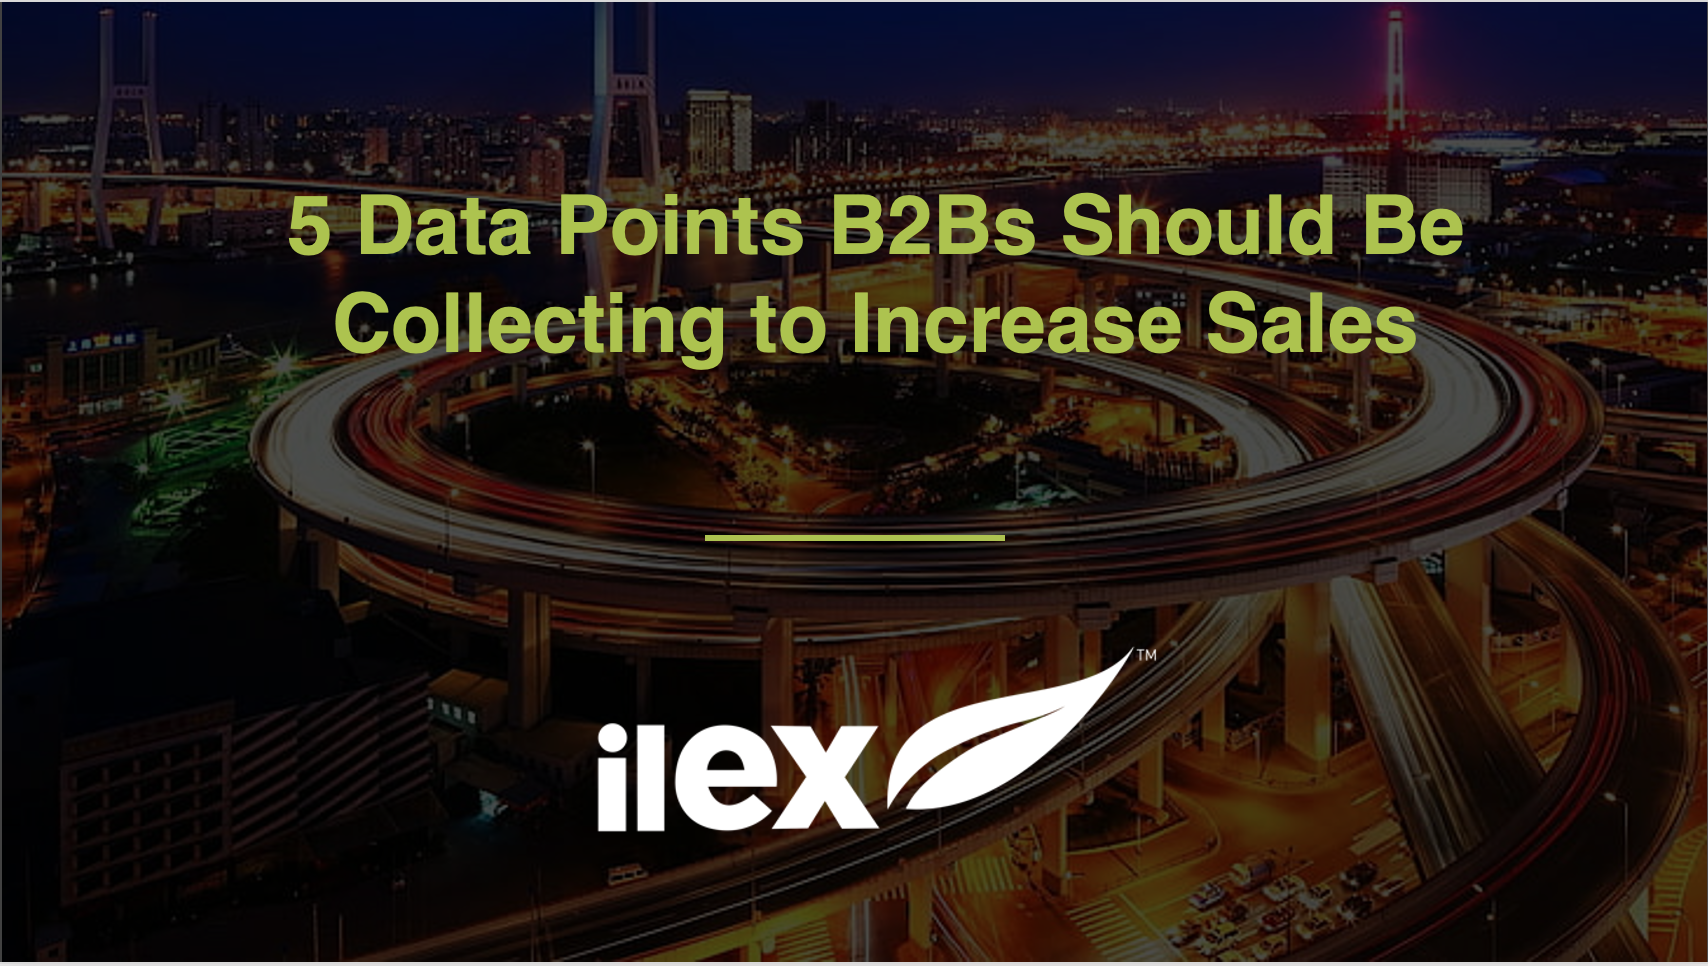 5 Data Points B2Bs Should Be Collecting to Increase Sales